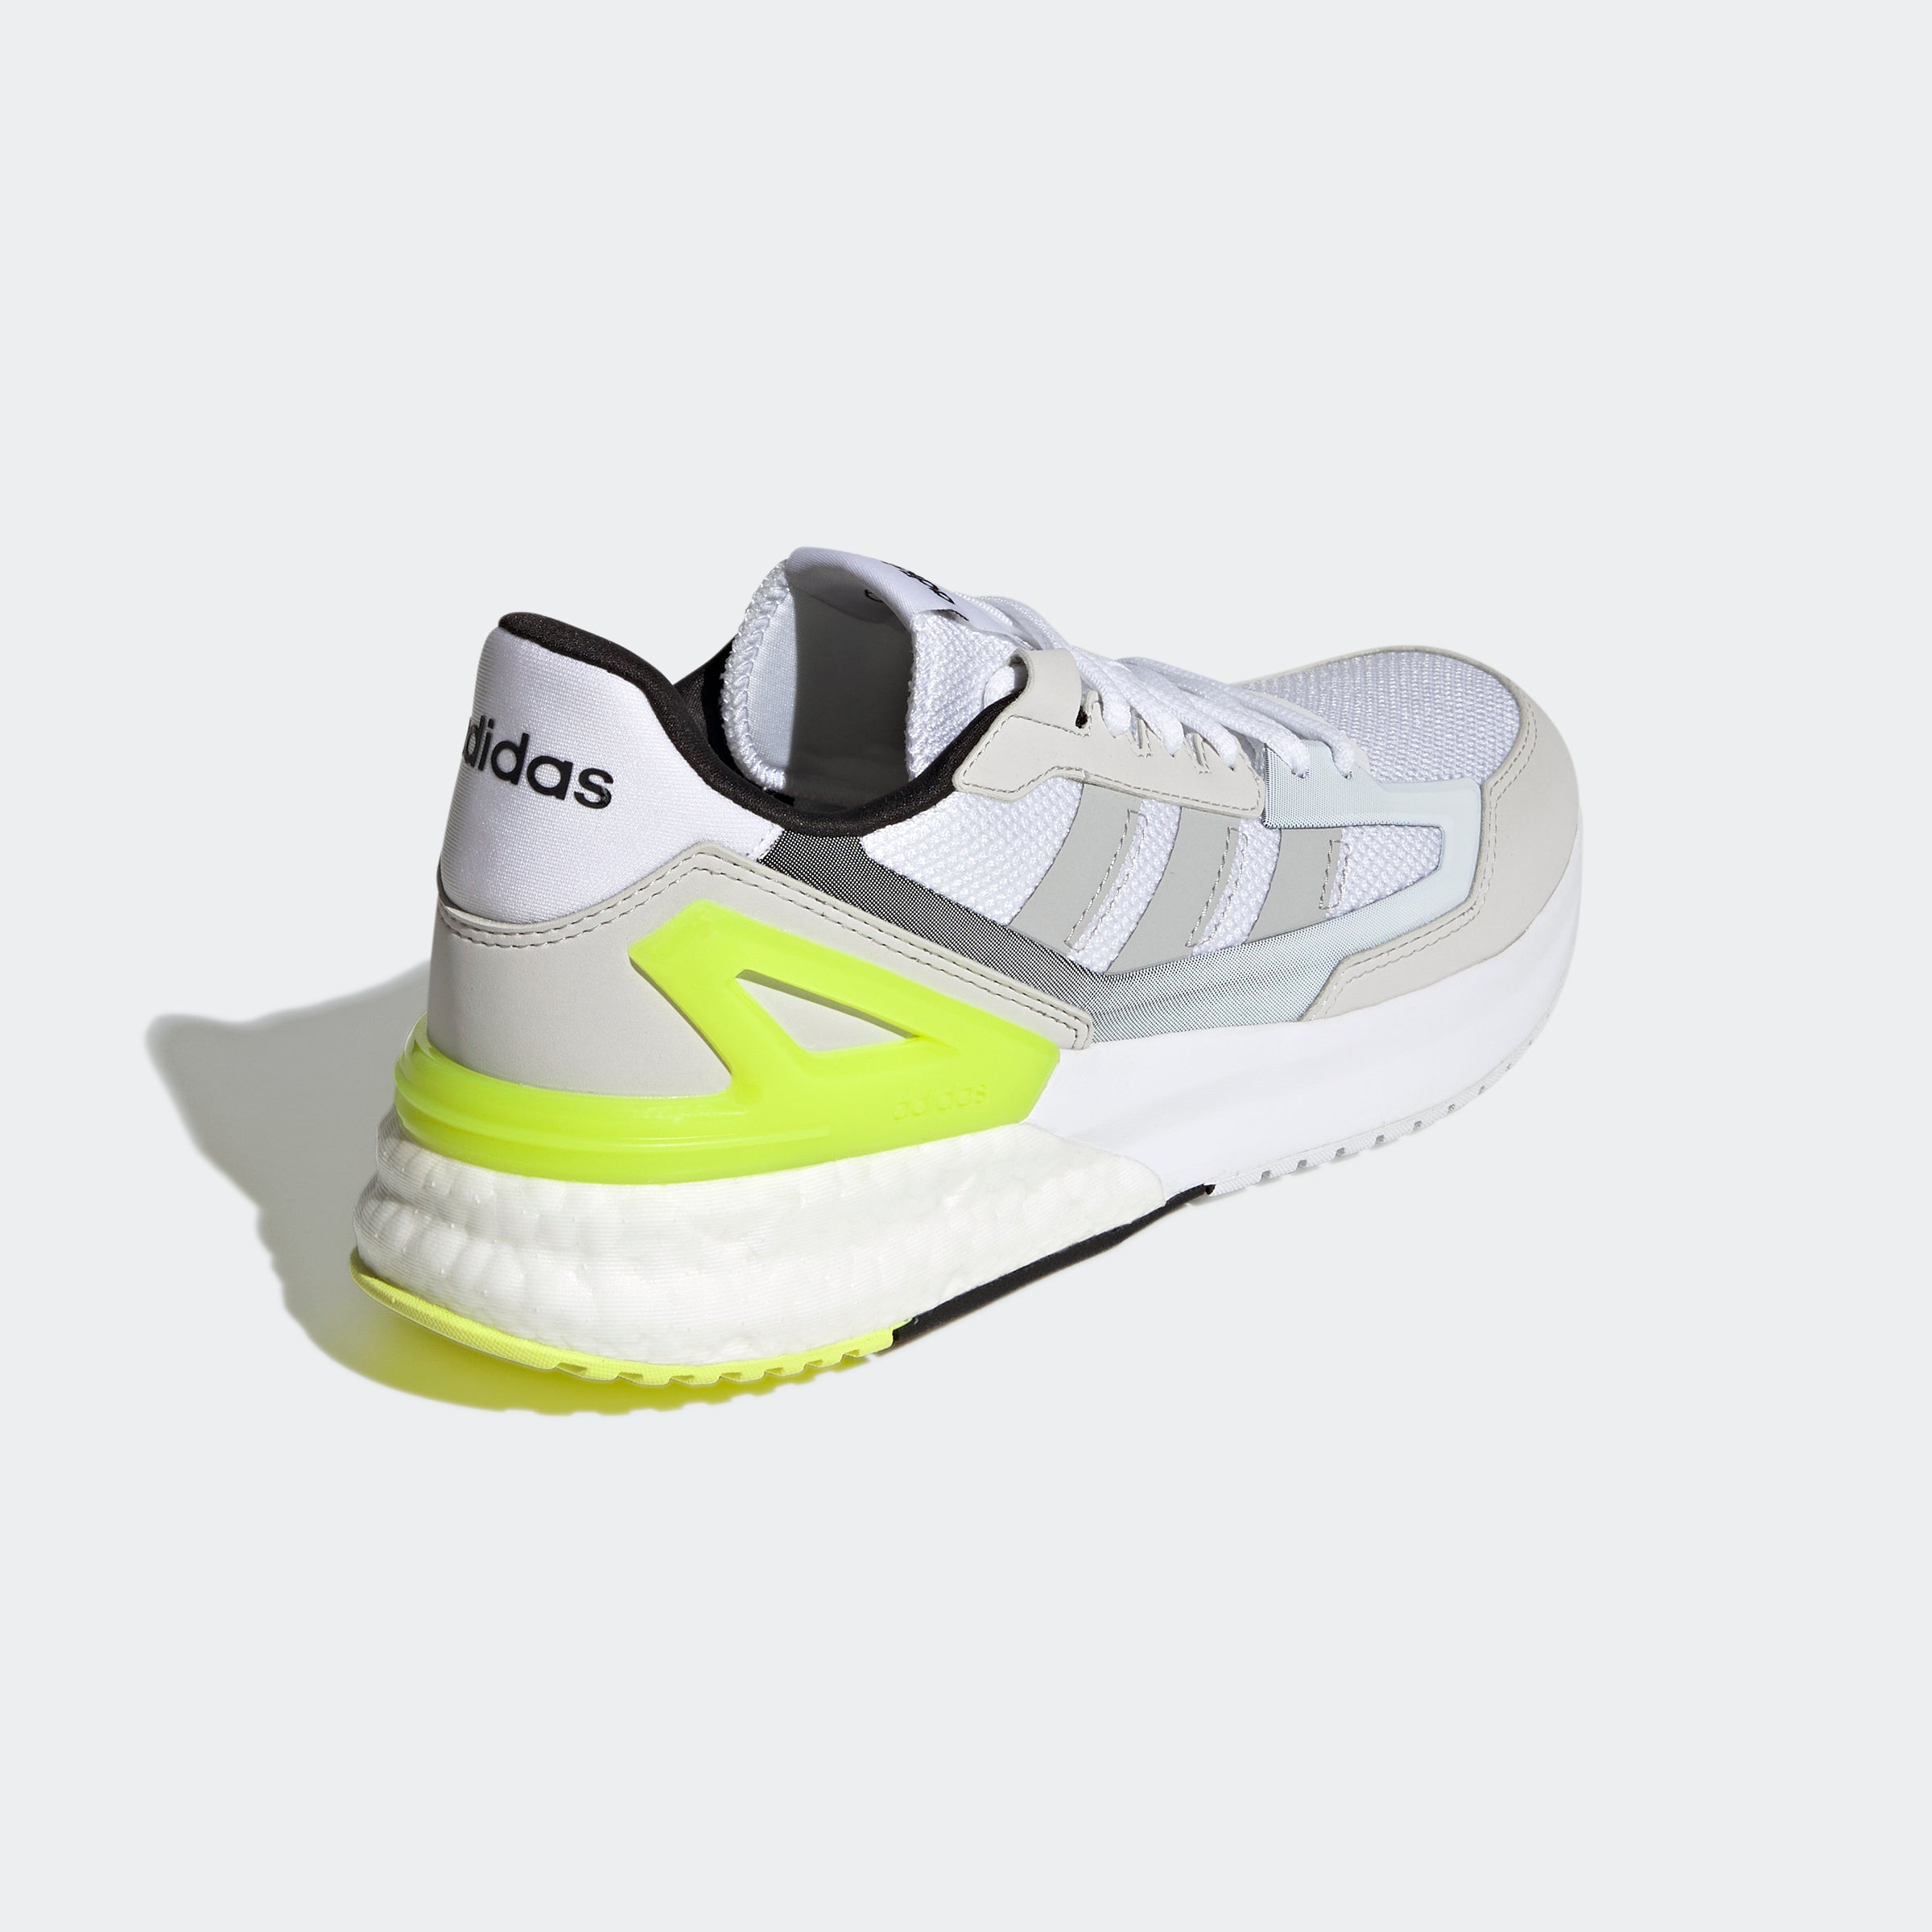 adidas Nebzed Super Boost Shoes White GW1105 | Chicago City Sports